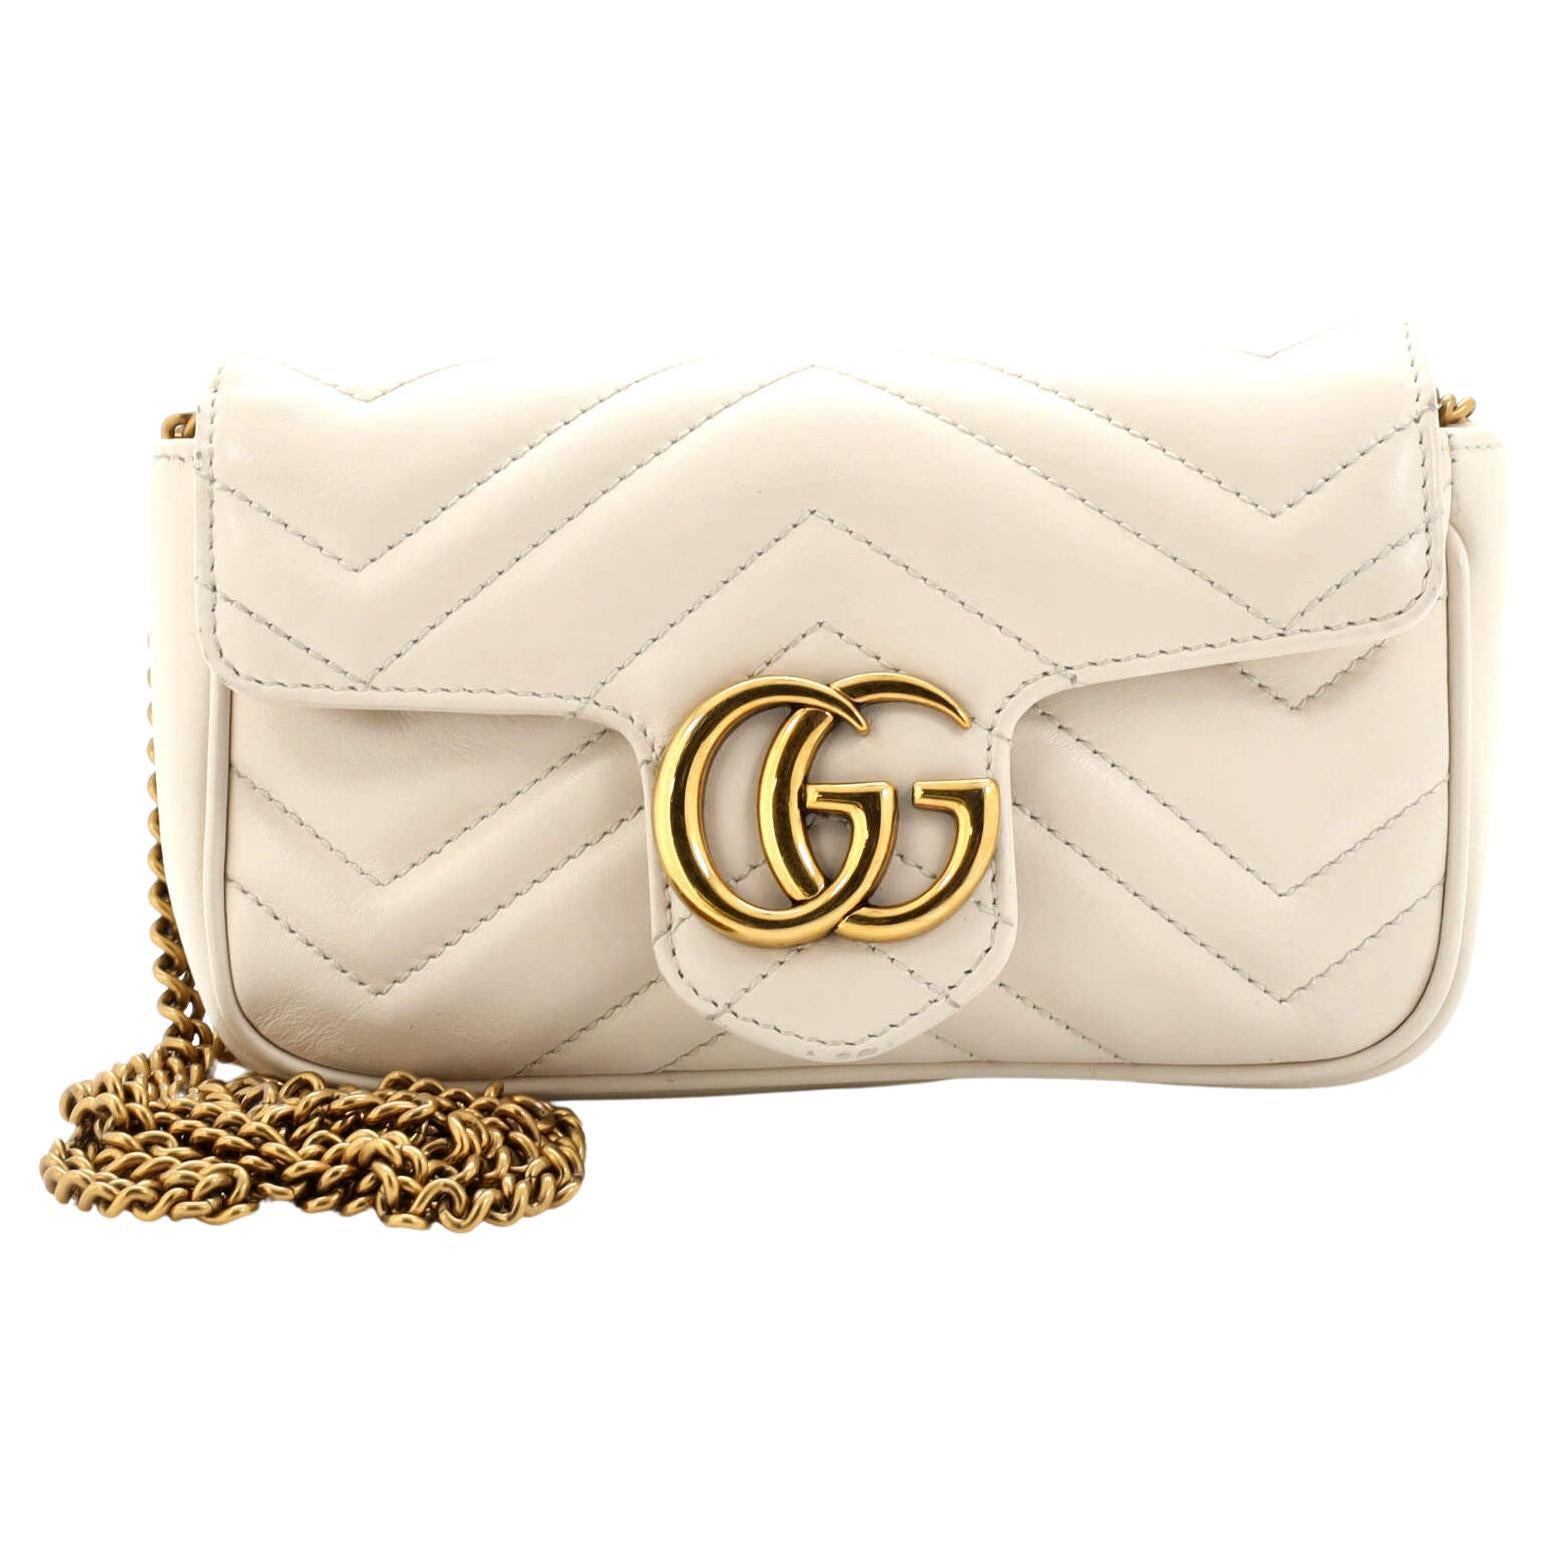 How to Spot Fake Gucci Bags: 7 Ways to Tell Real Purses